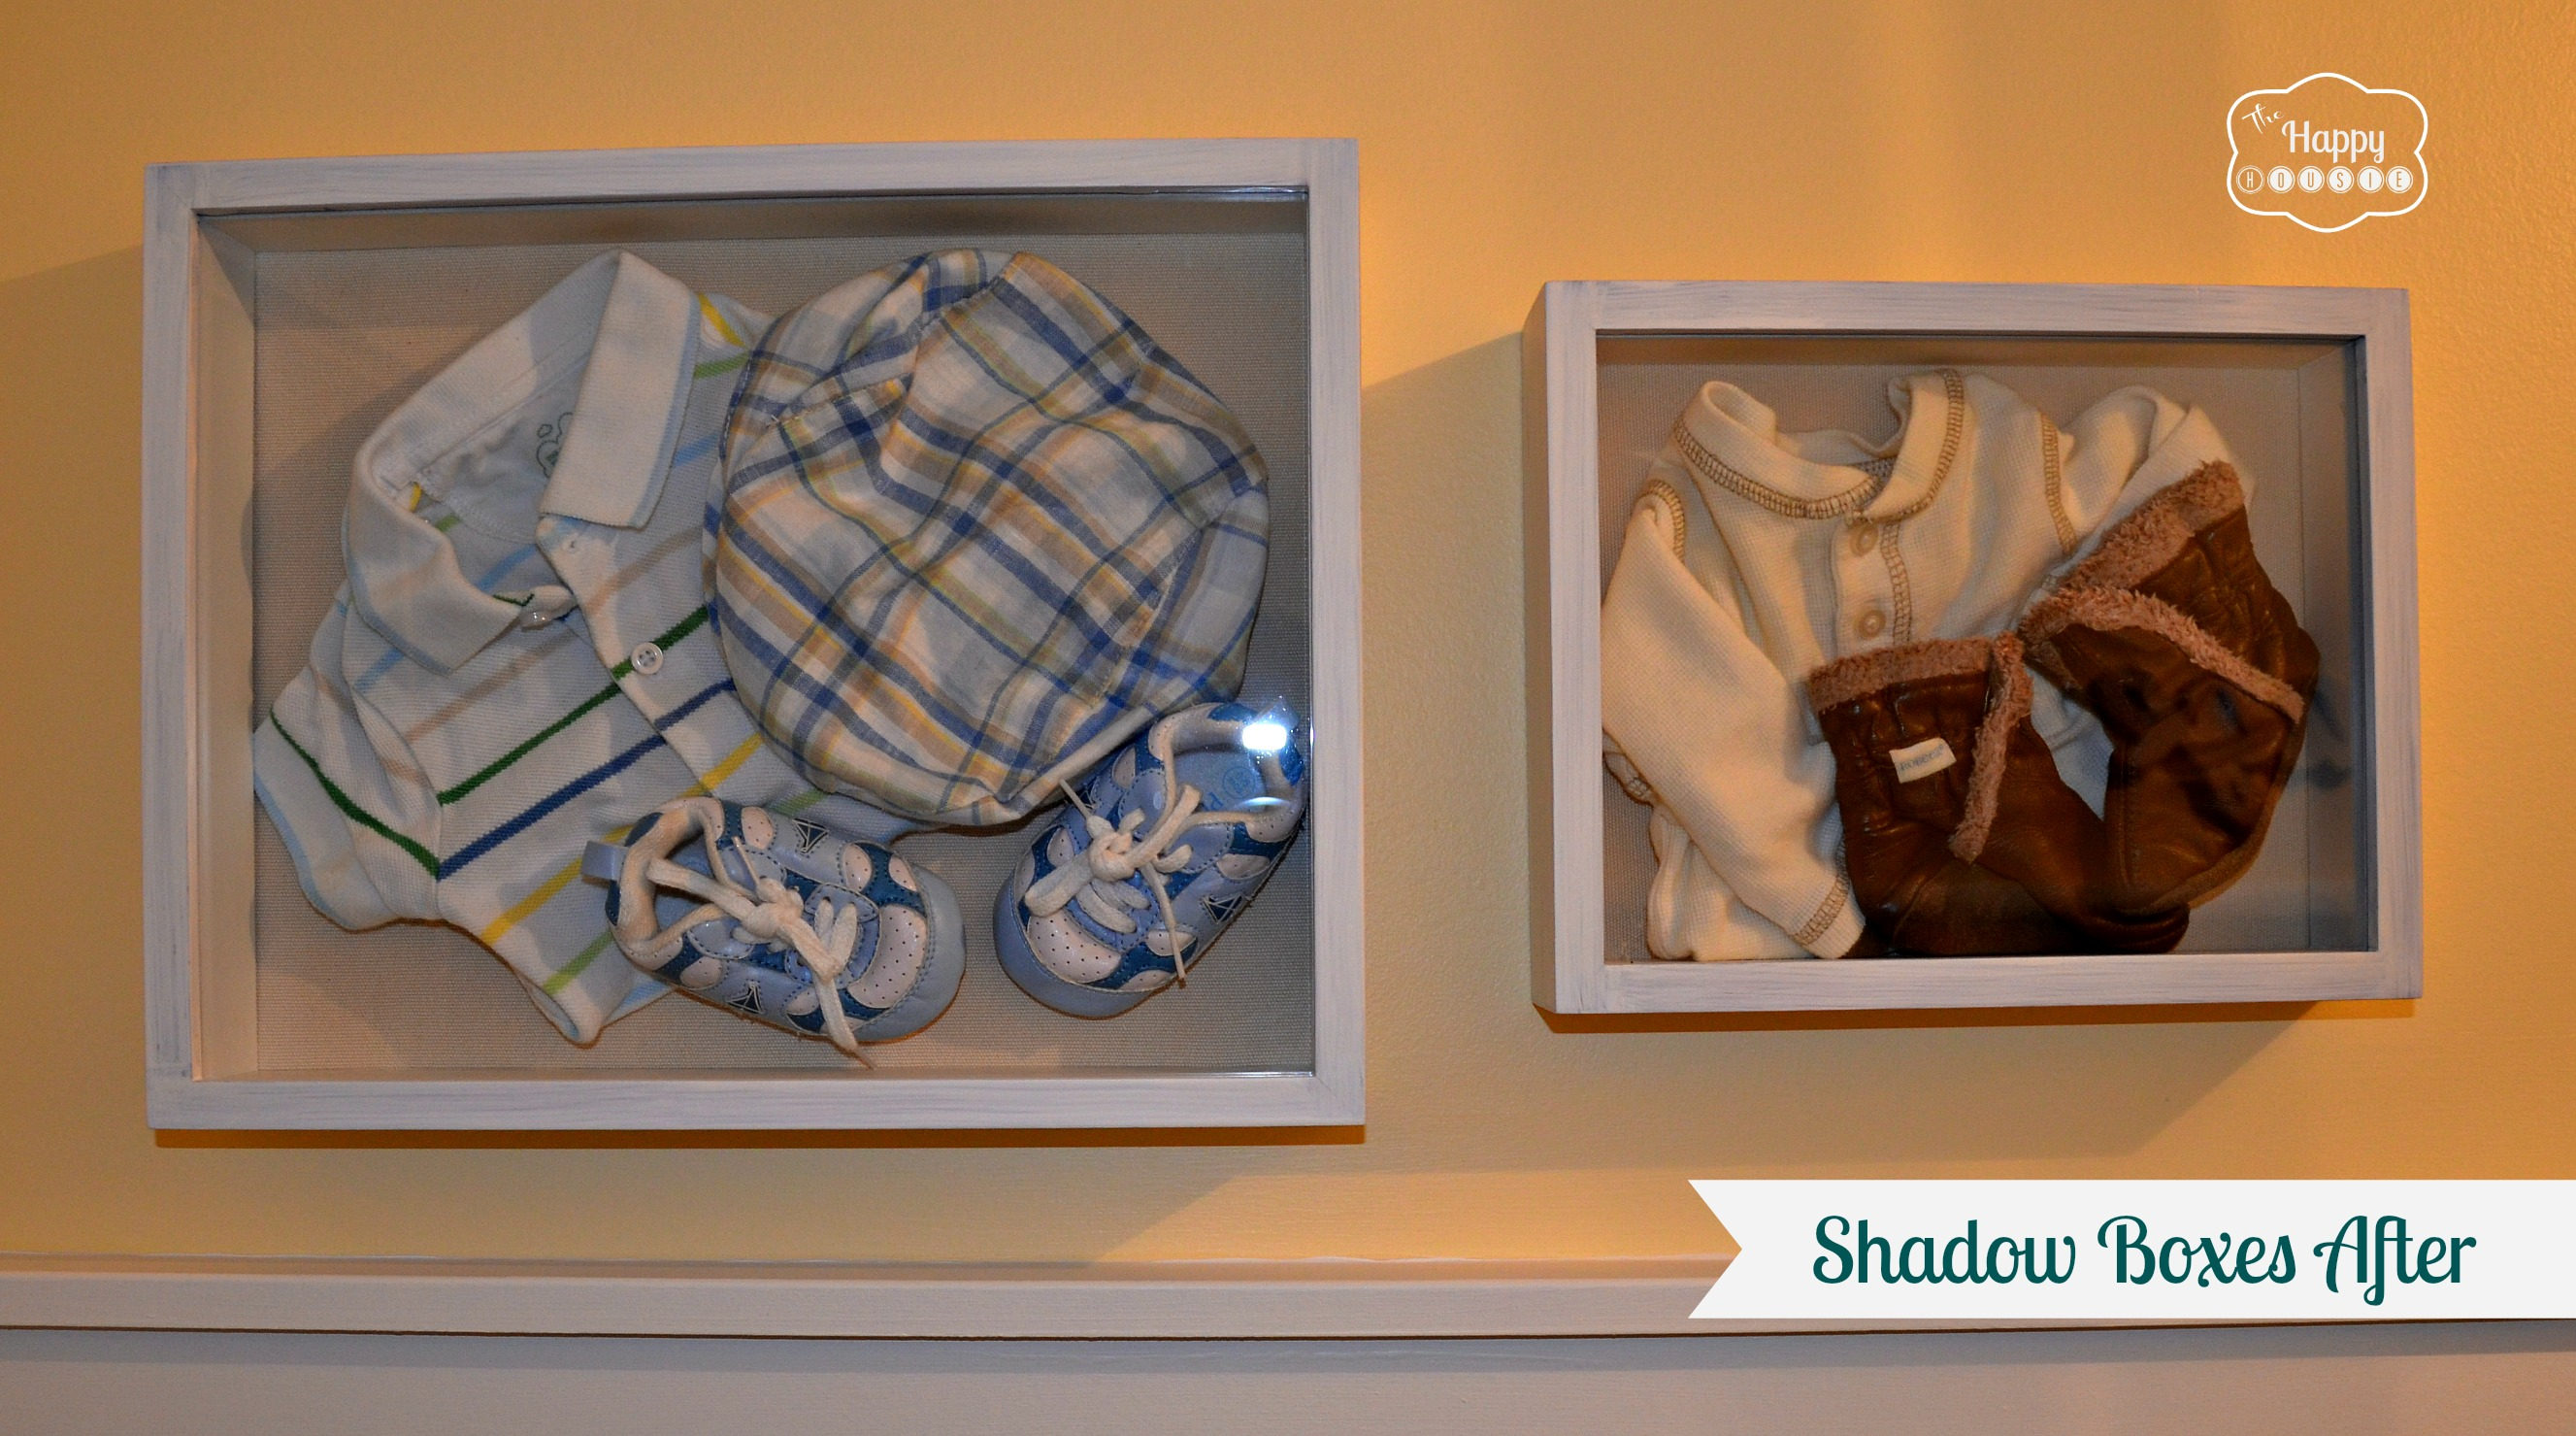 Decorating: Some DIY Art for the Laundry Room